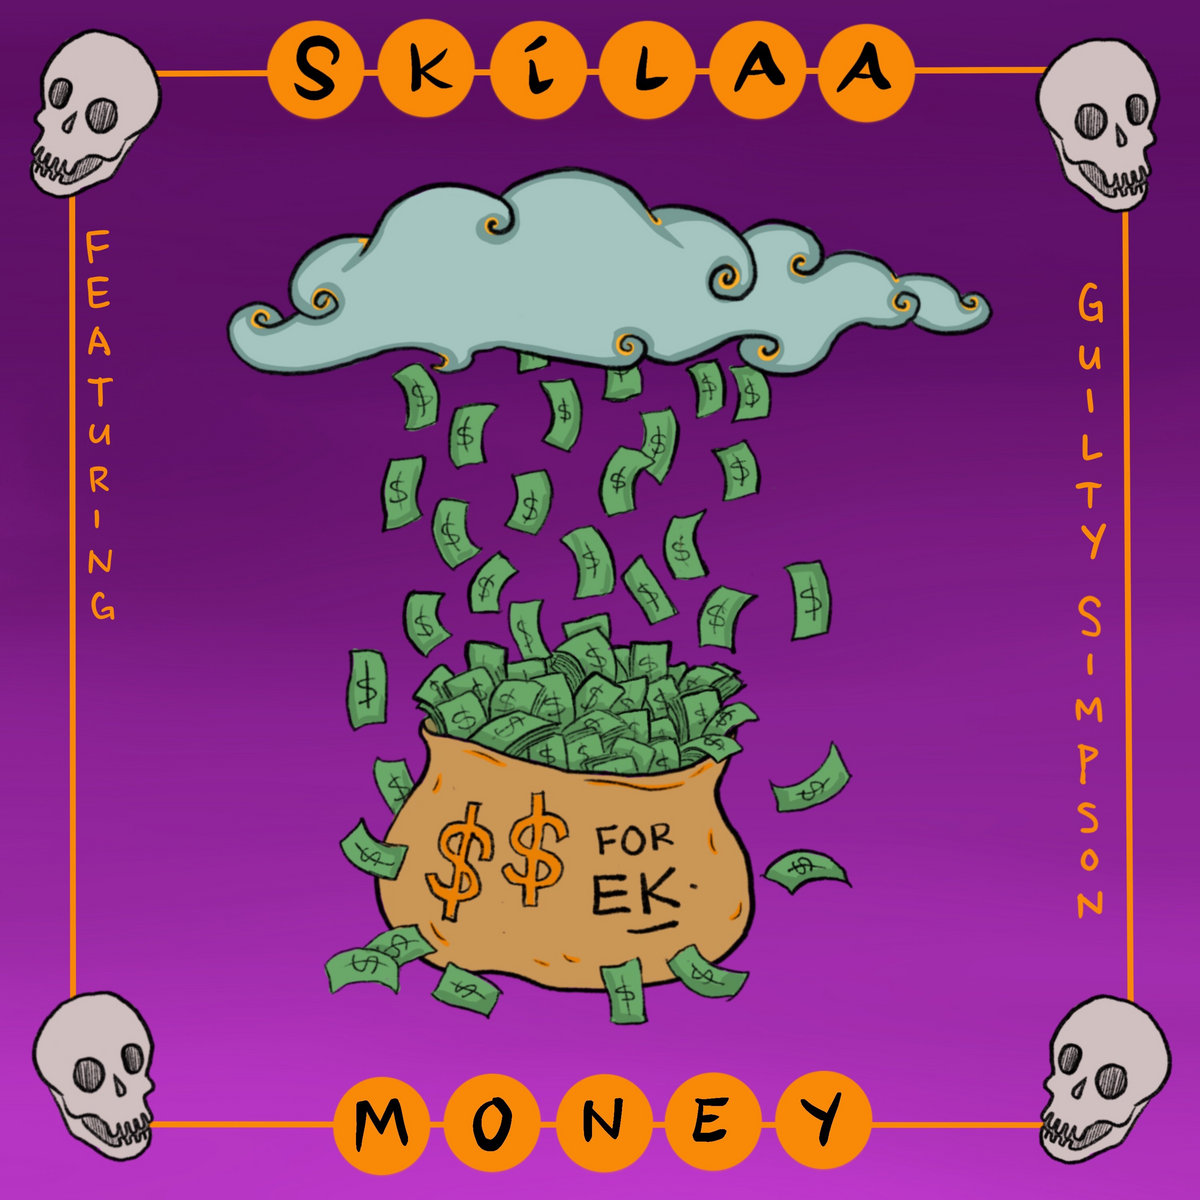 Money (featuring Guilty Simpson)